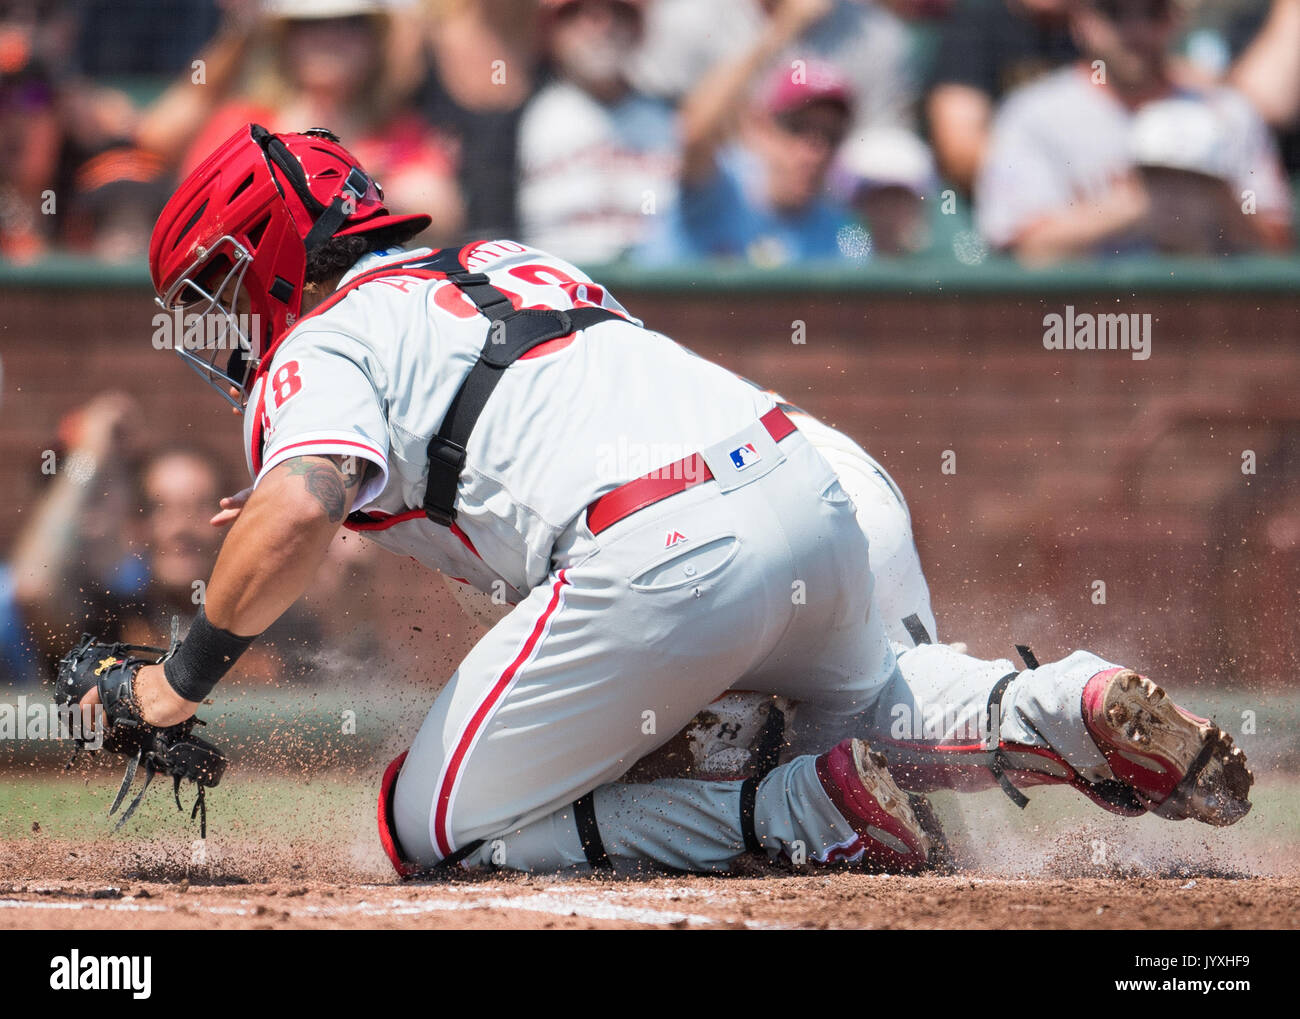 San Francisco, USA. 20th Aug, 2017. Philadelphia Phillies catcher Jorge Alfaro (38) makes the tag on SF catcher Buster Posey (not shown) during a MLB game between the Philadelphia Phillies and the San Francisco Giants at AT&T Park in San Francisco, California. Credit: Cal Sport Media/Alamy Live News Stock Photo